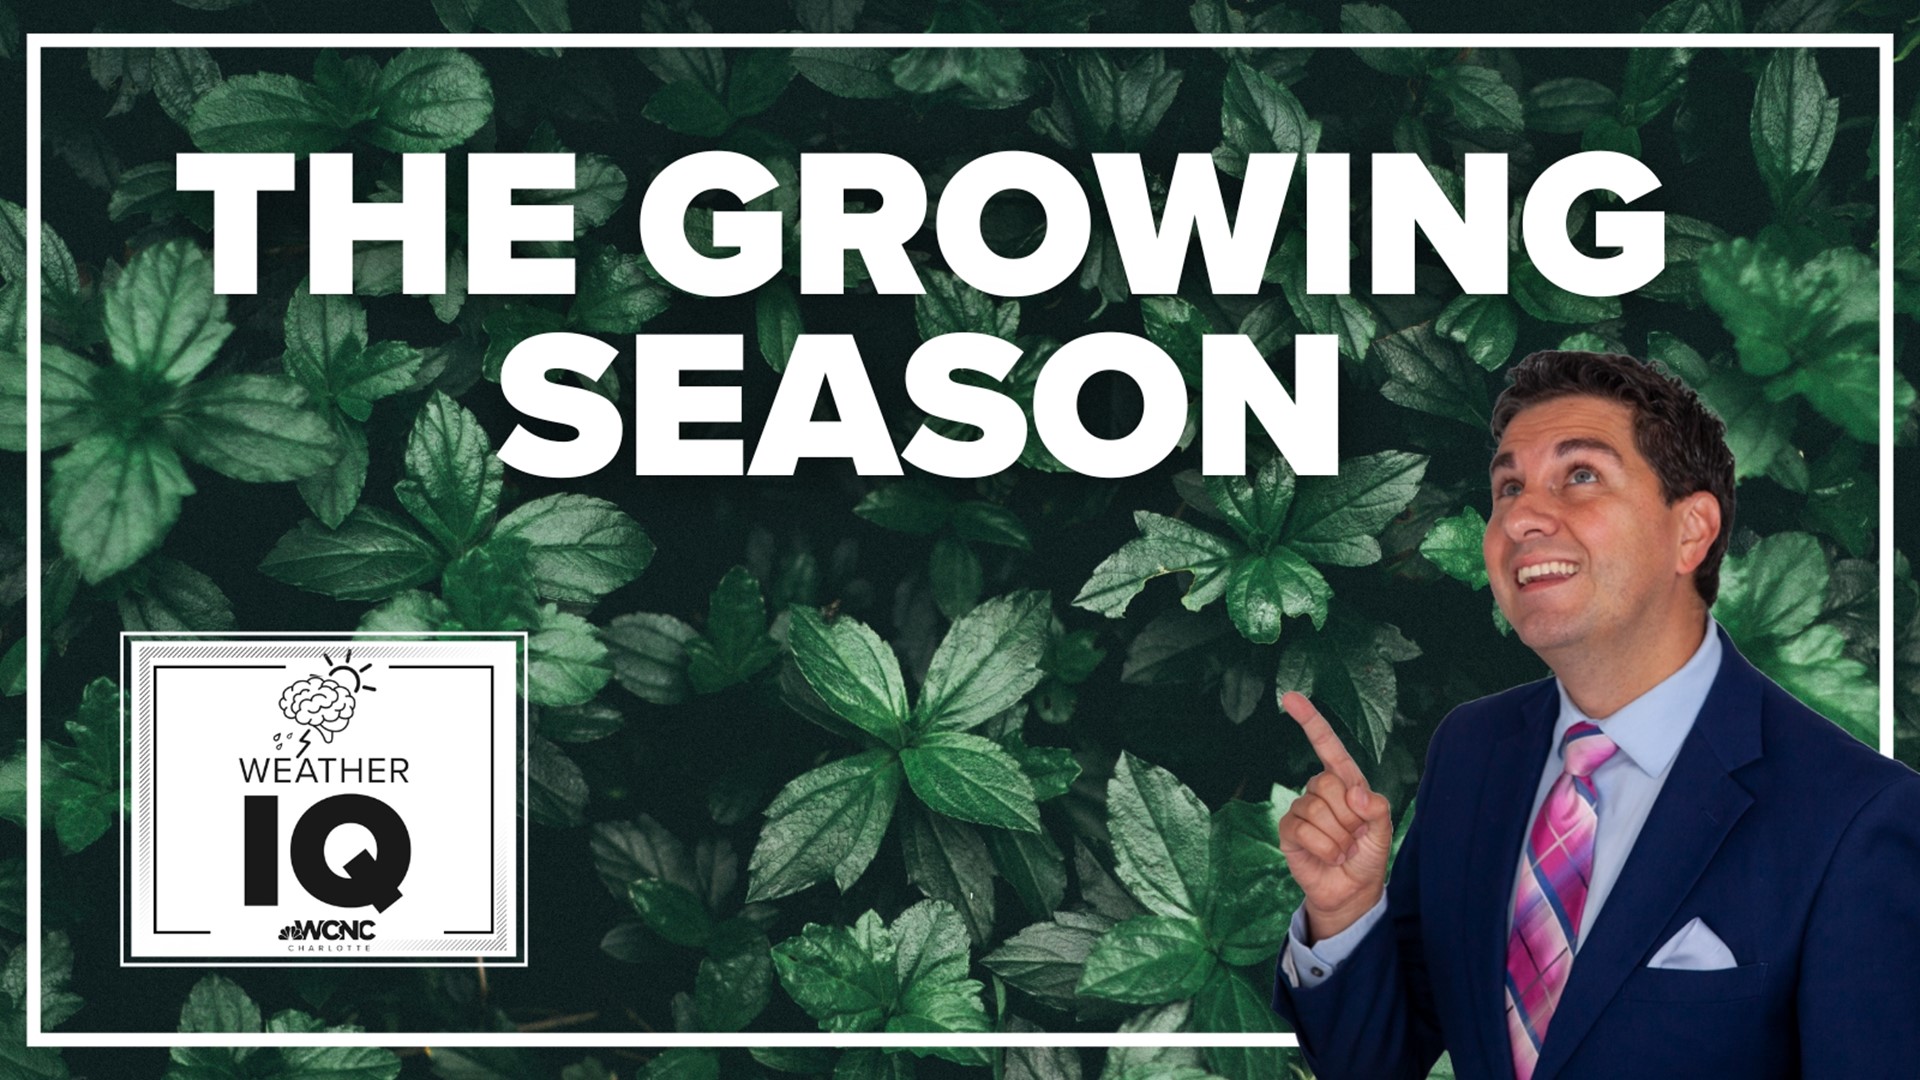 What is The Growing Season?